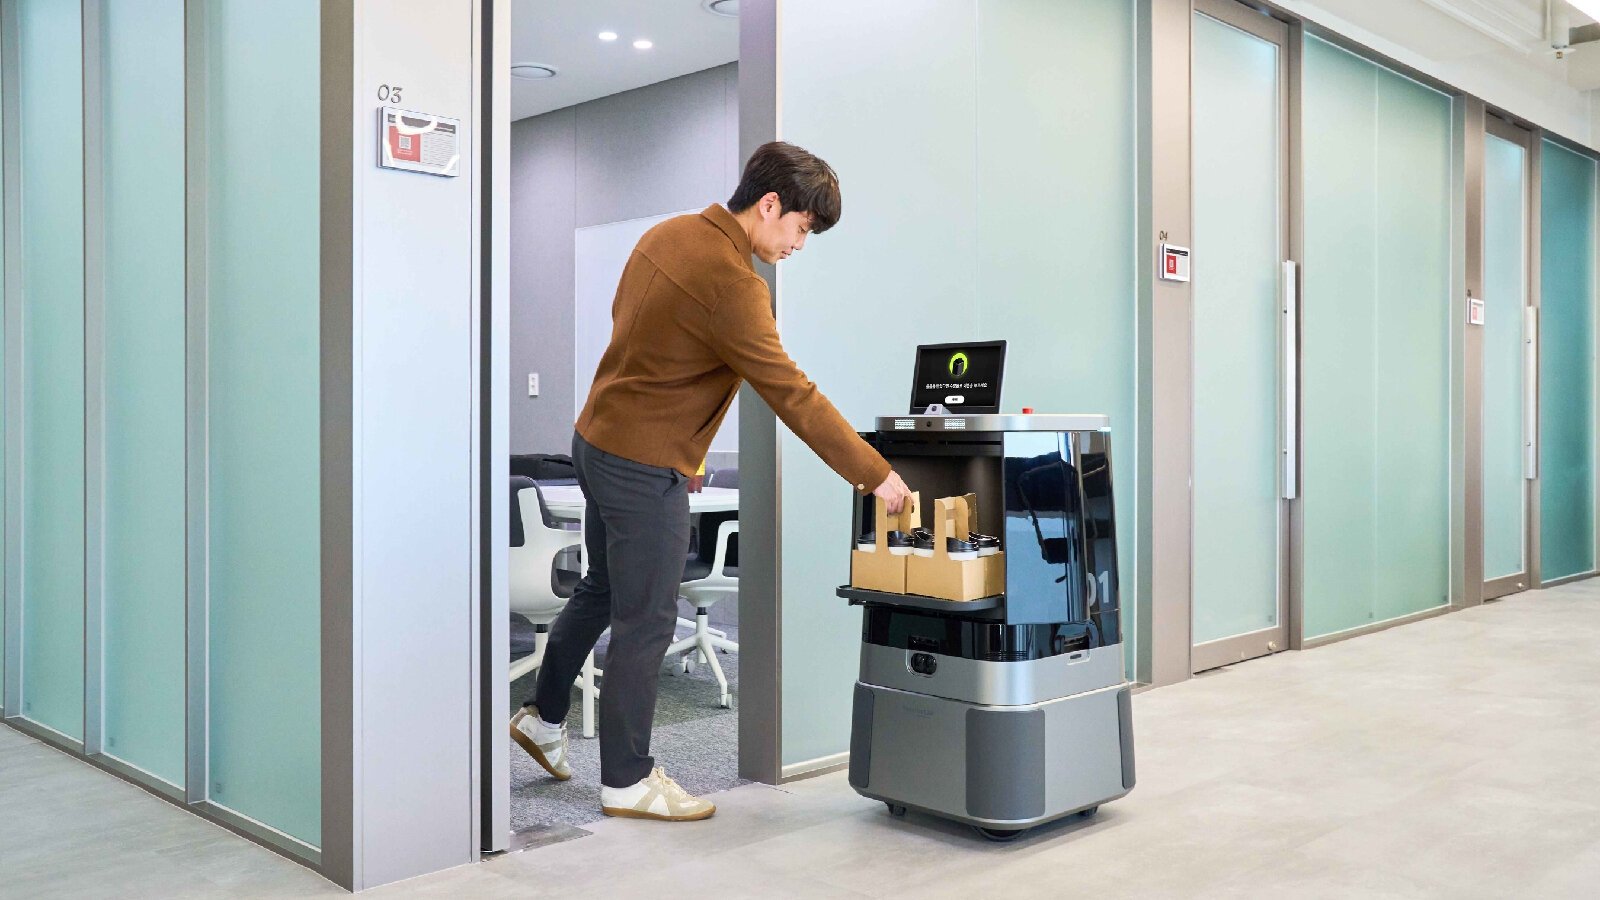 Hyundai Has Robots That Deliver Coffee and Park Cars